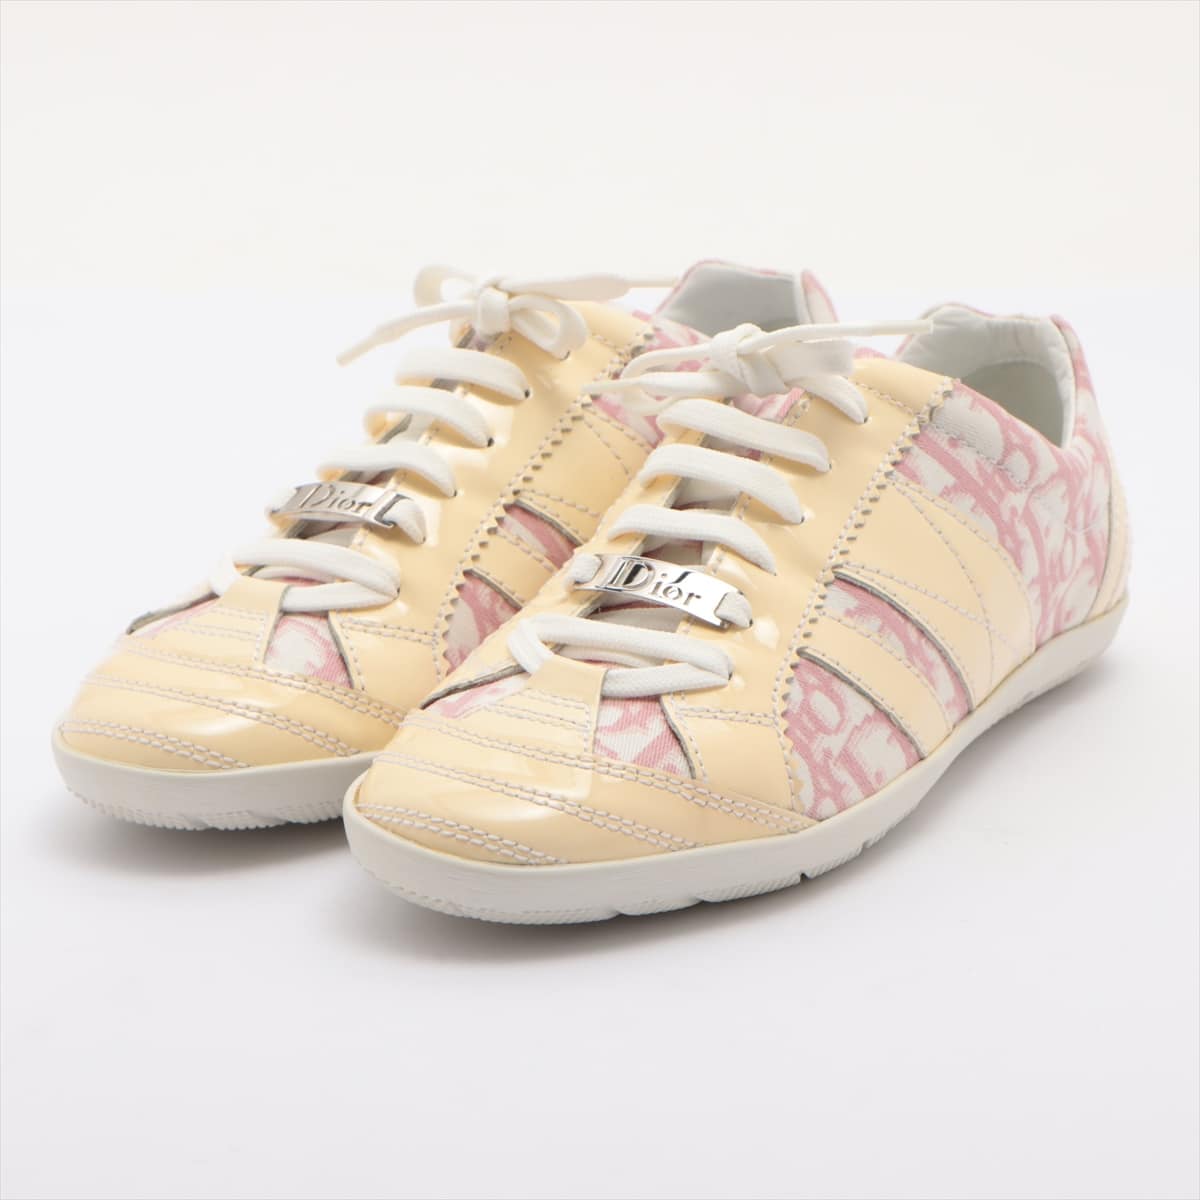 Christian Dior Trotter Canvas × Patent Leather Sneakers 37 Ladies' Beige×Pink